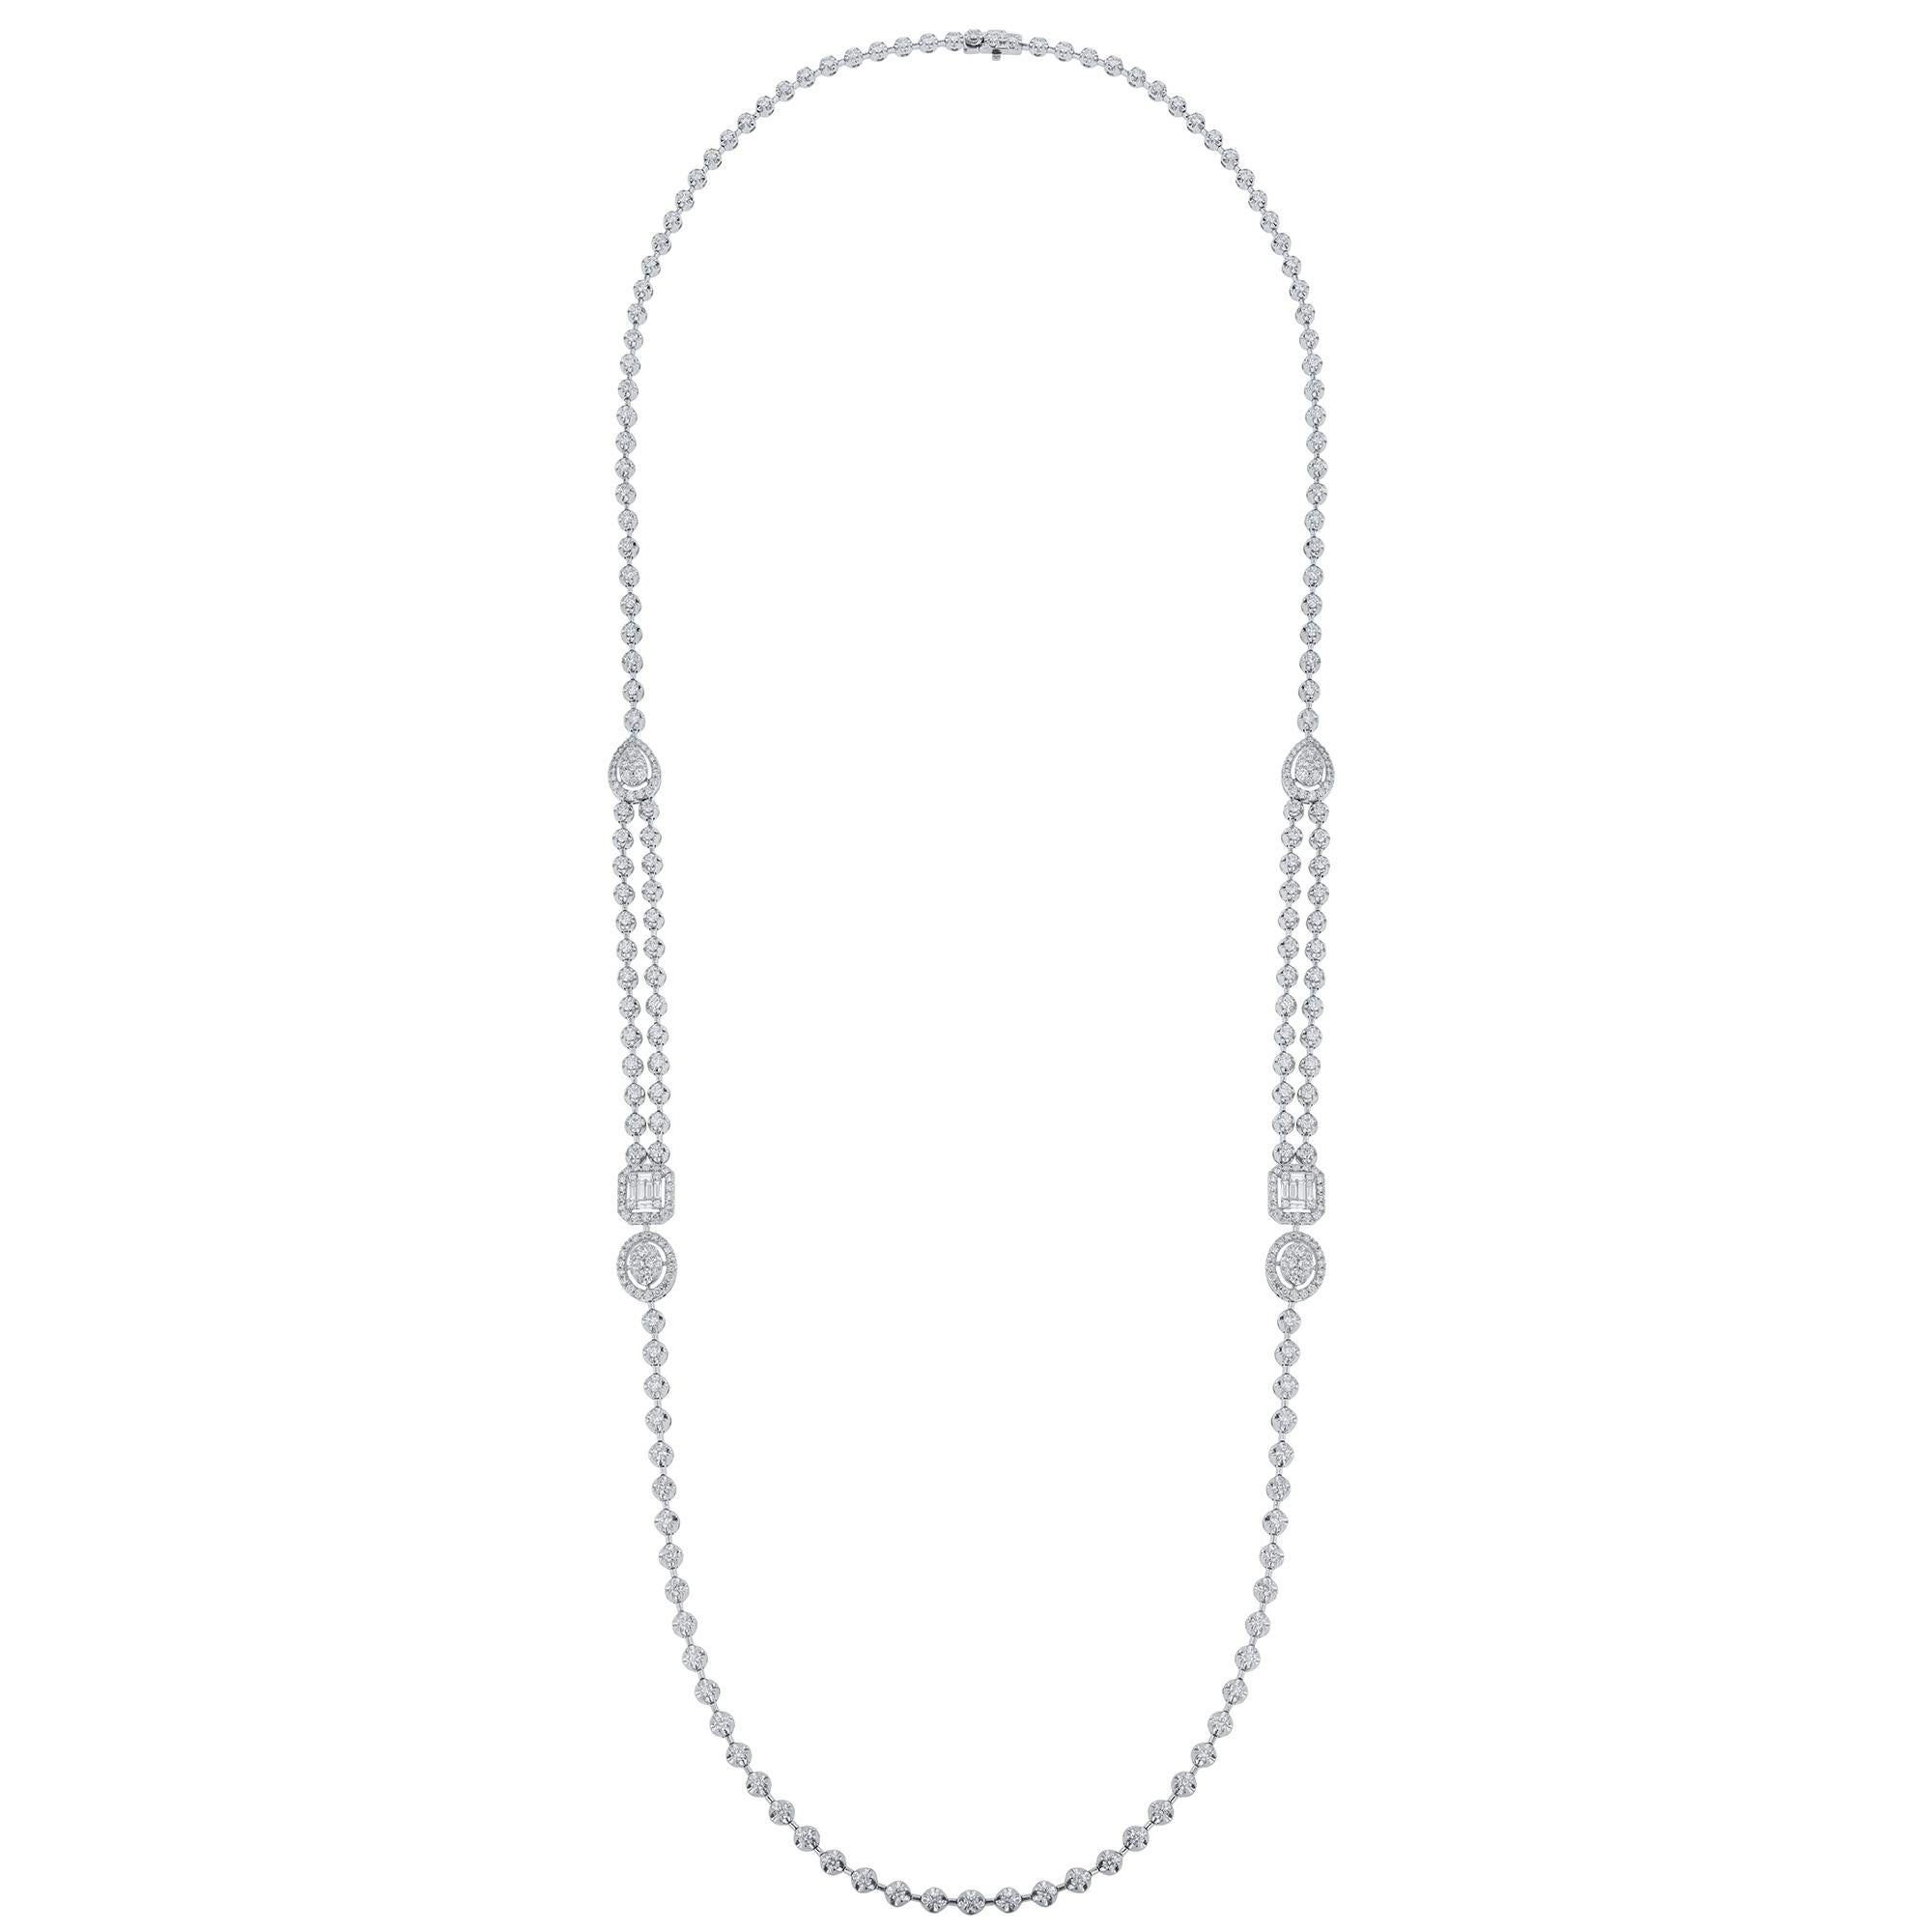 This necklace is made in 18K white gold and features 323 round cut diamonds weighing 8.86 carats. With 12 baguette cut diamonds weighing 0.46 carats. Necklace has a color grade (I) and clarity grade (SI1). All diamonds are prong set.